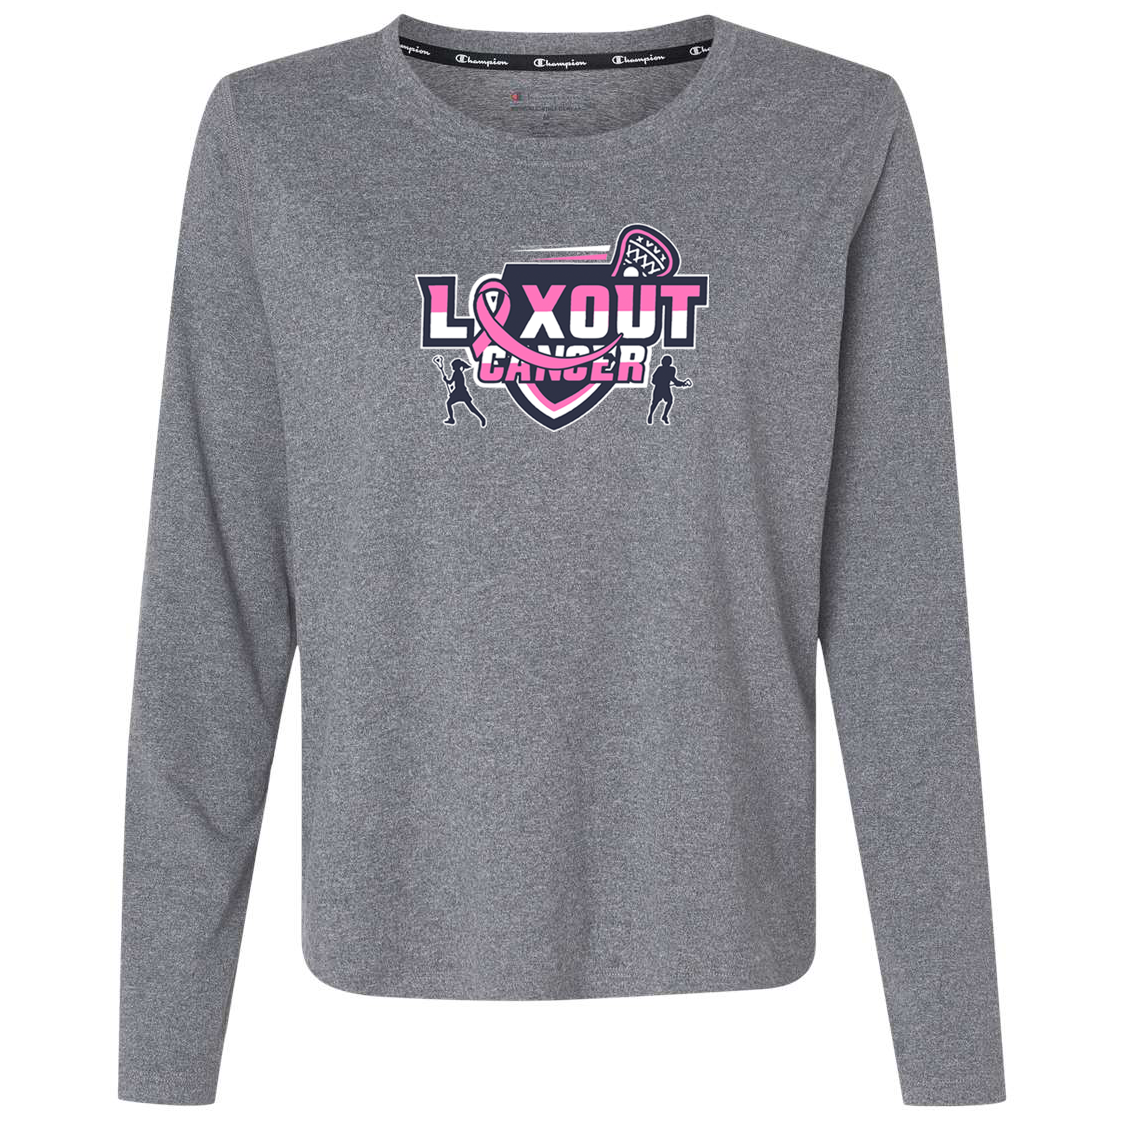 LaxOut Cancer Champion Women's Soft Touch Long Sleeve